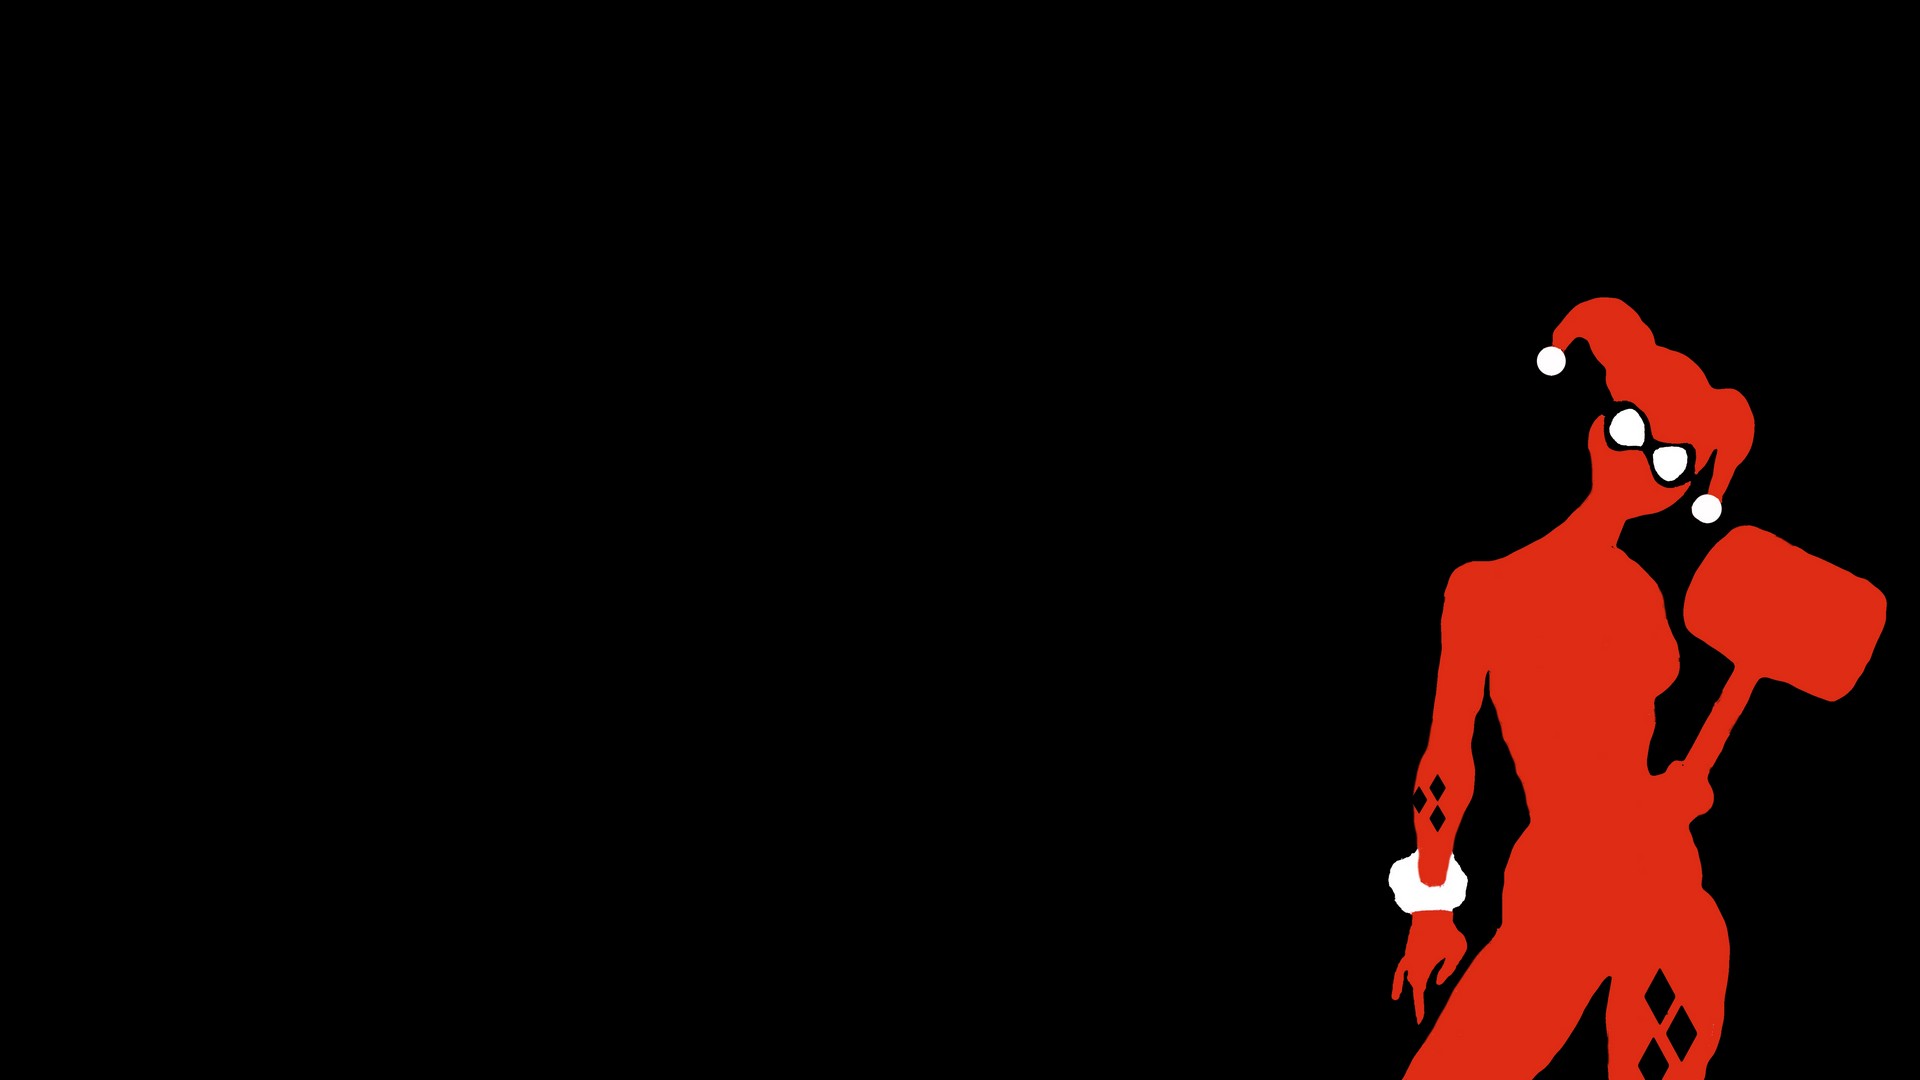 Harley Quinn The Movie Wallpaper with resolution 1920X1080 pixel. You can use this wallpaper as background for your desktop Computer Screensavers, Android or iPhone smartphones